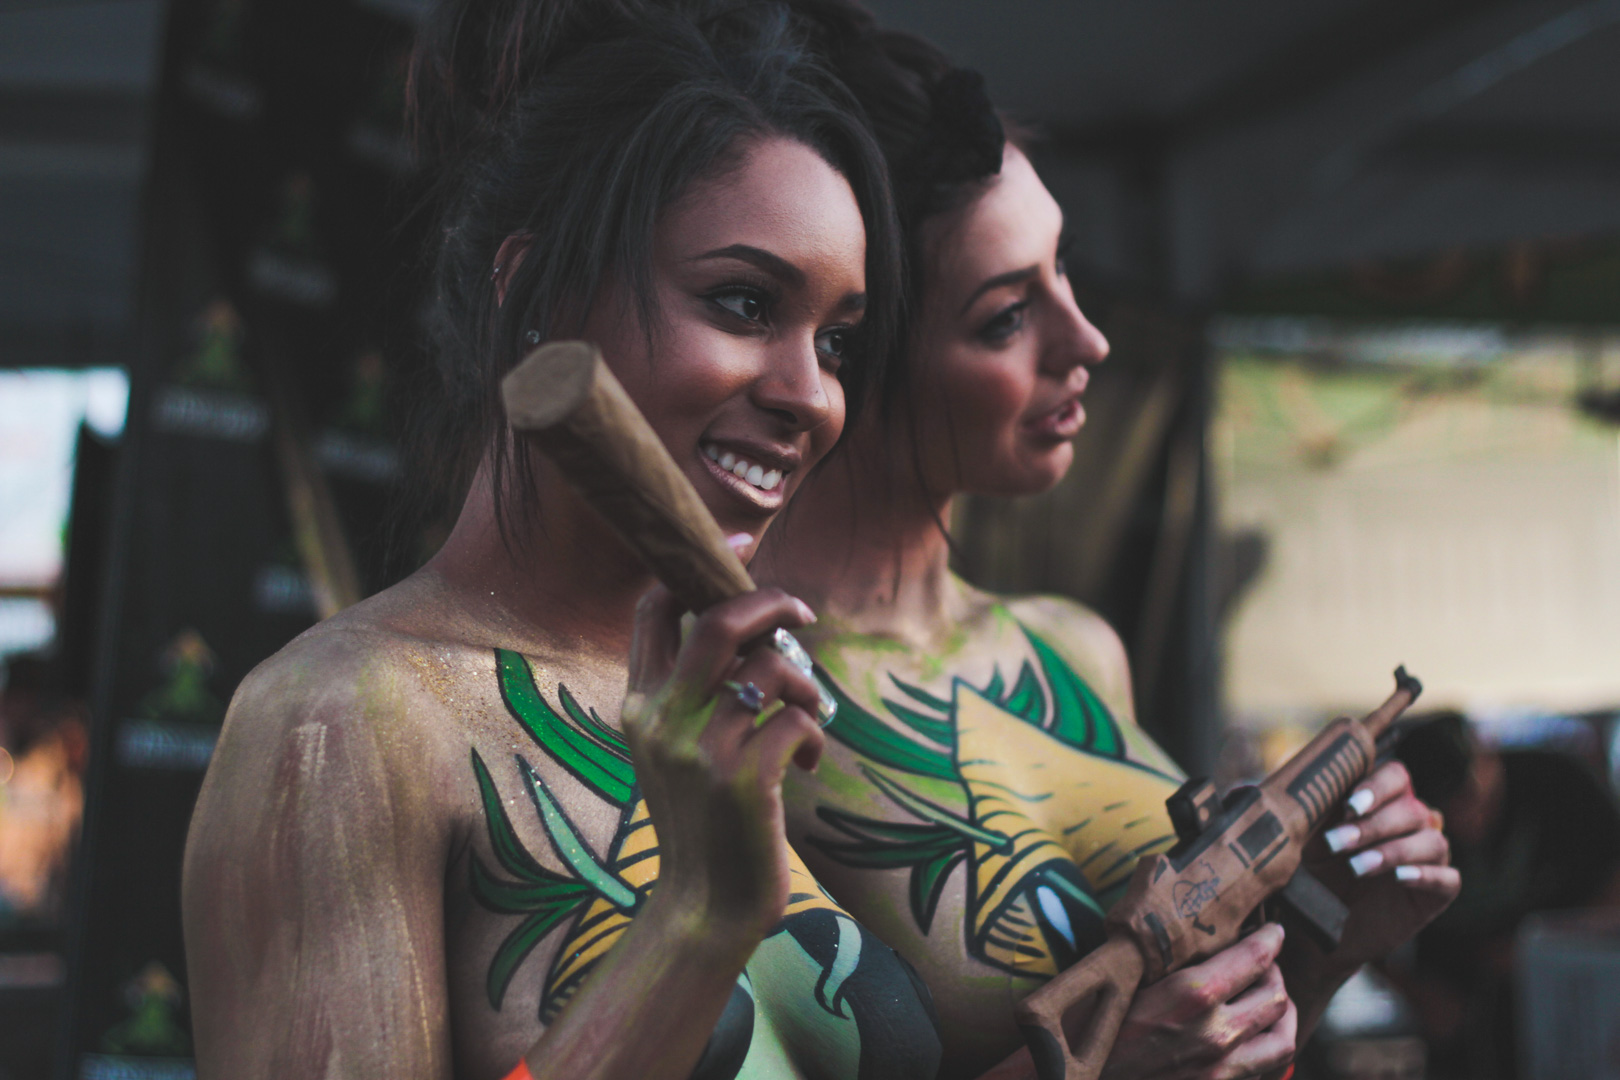 Bodypaint in Los Angeles